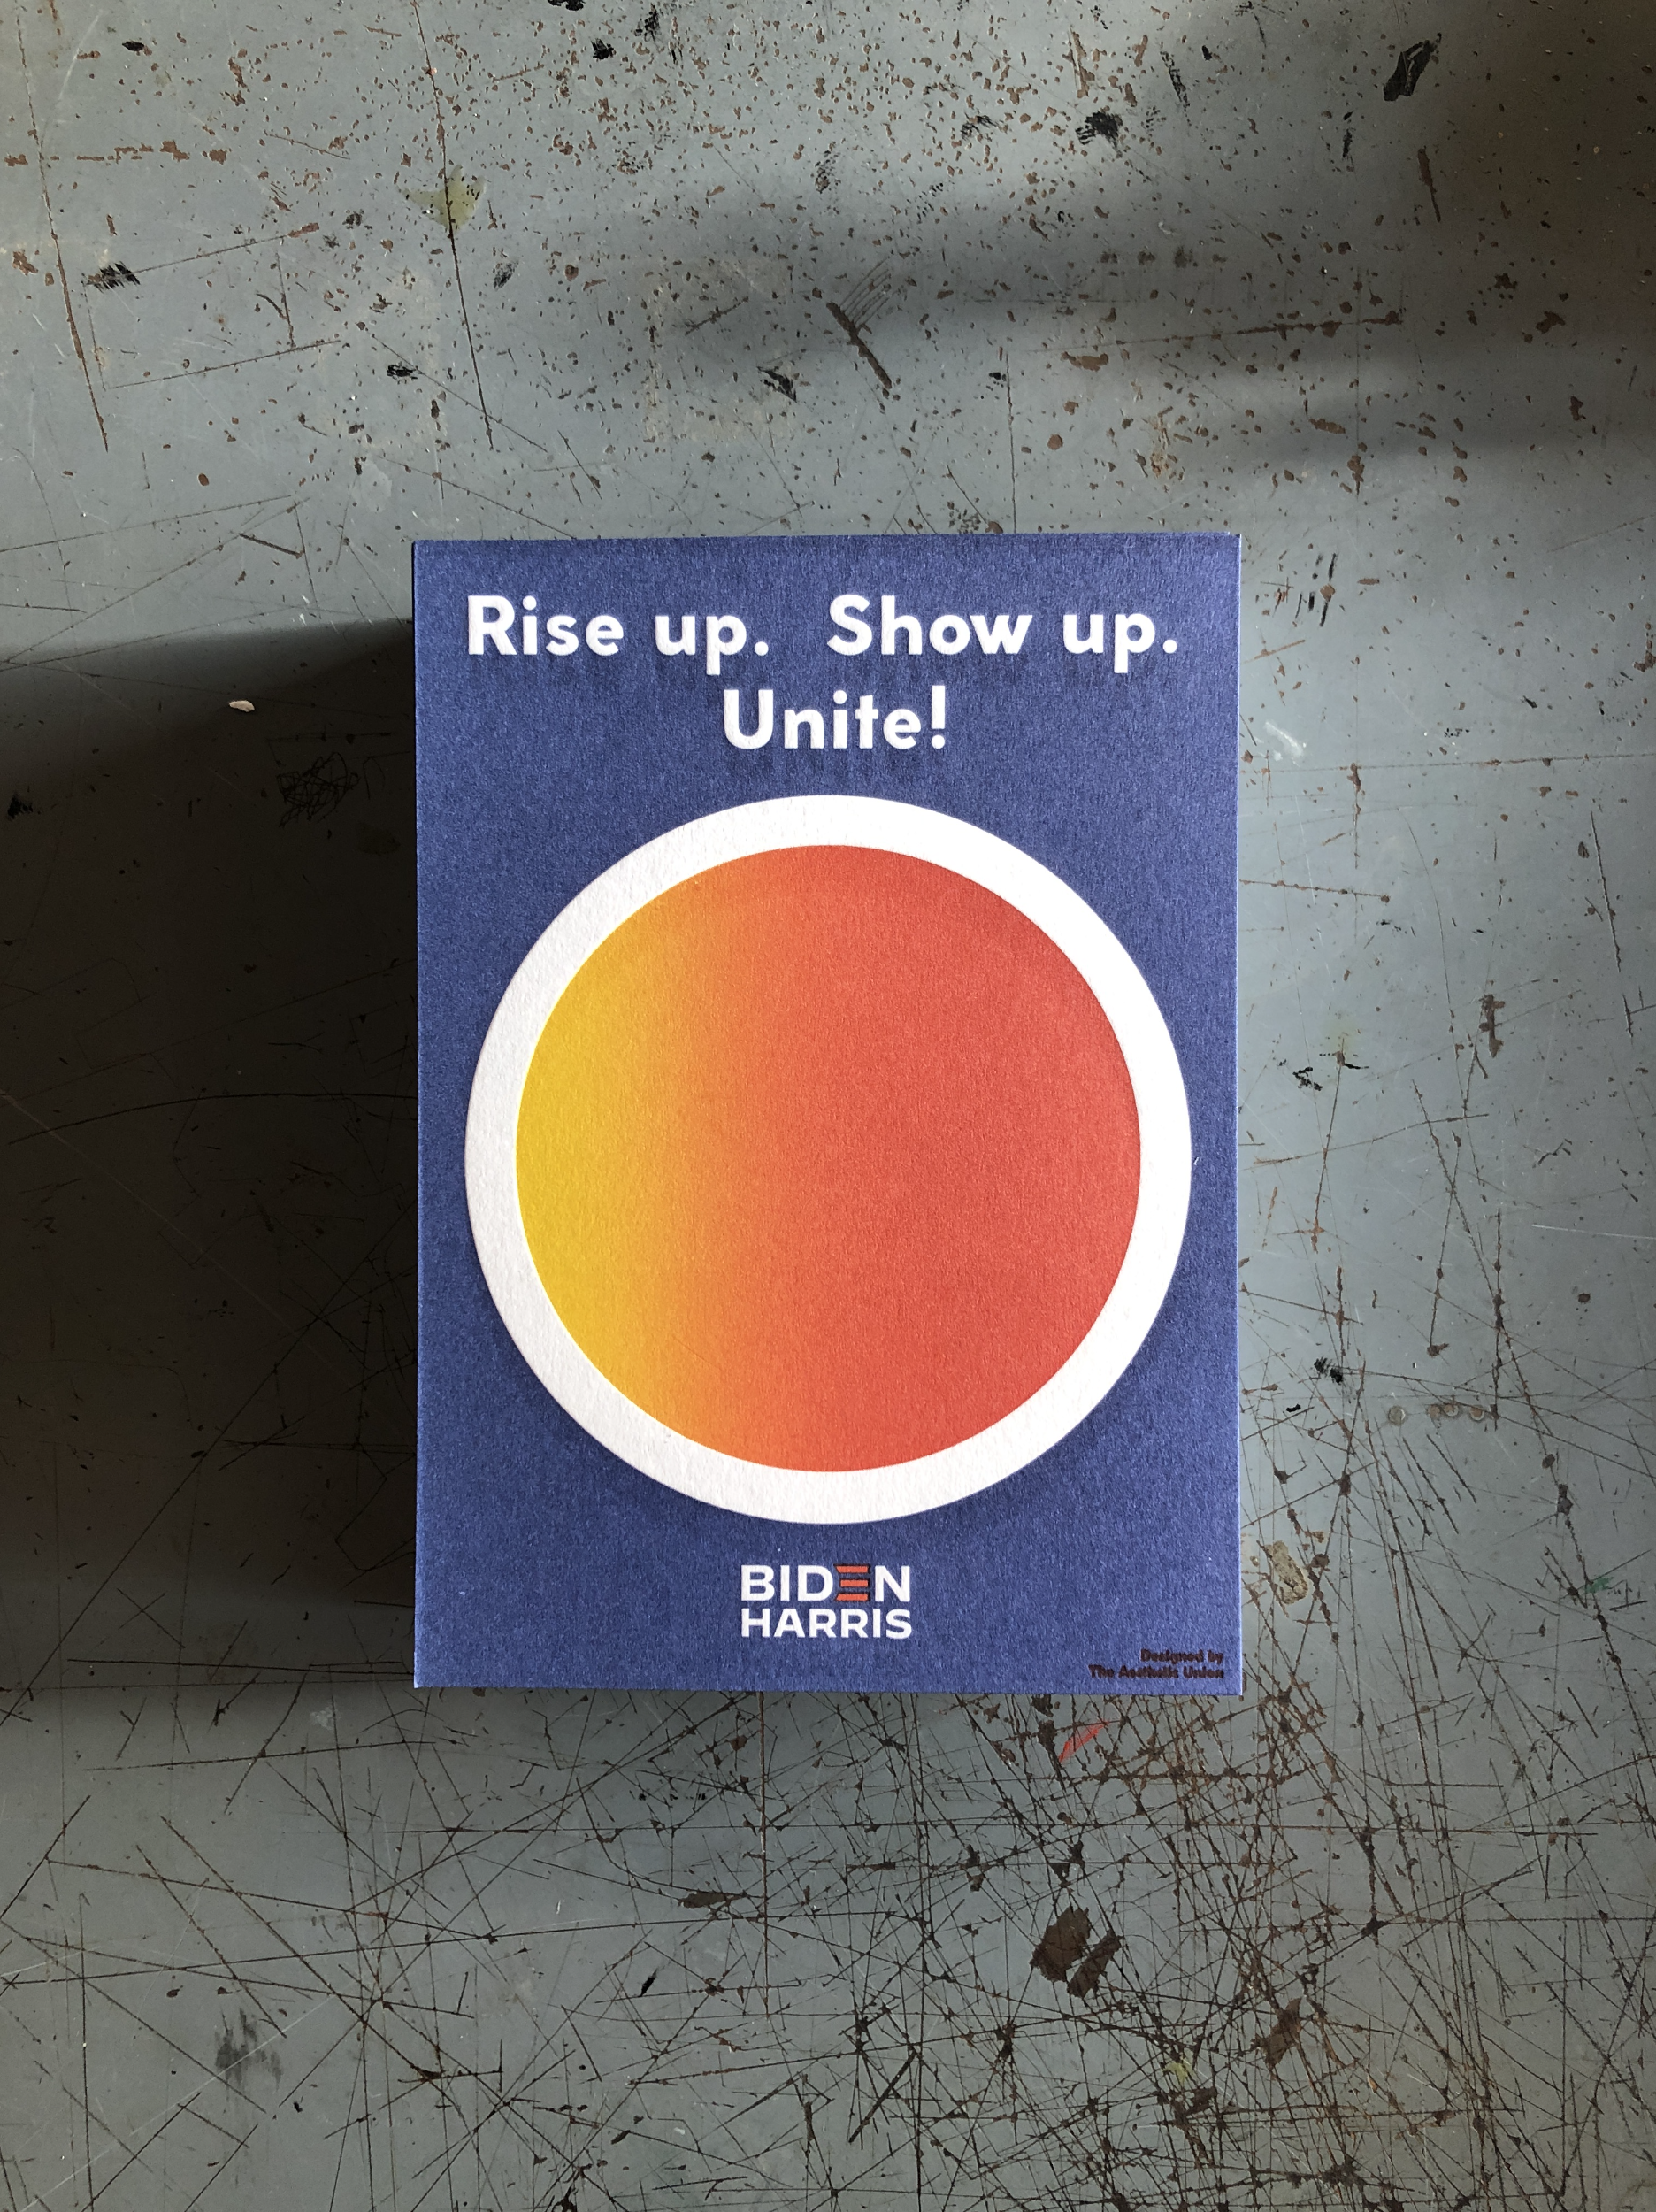 Lettering art of the phrase 'Rise up. Show up. Unite!' by Aesthetic Union